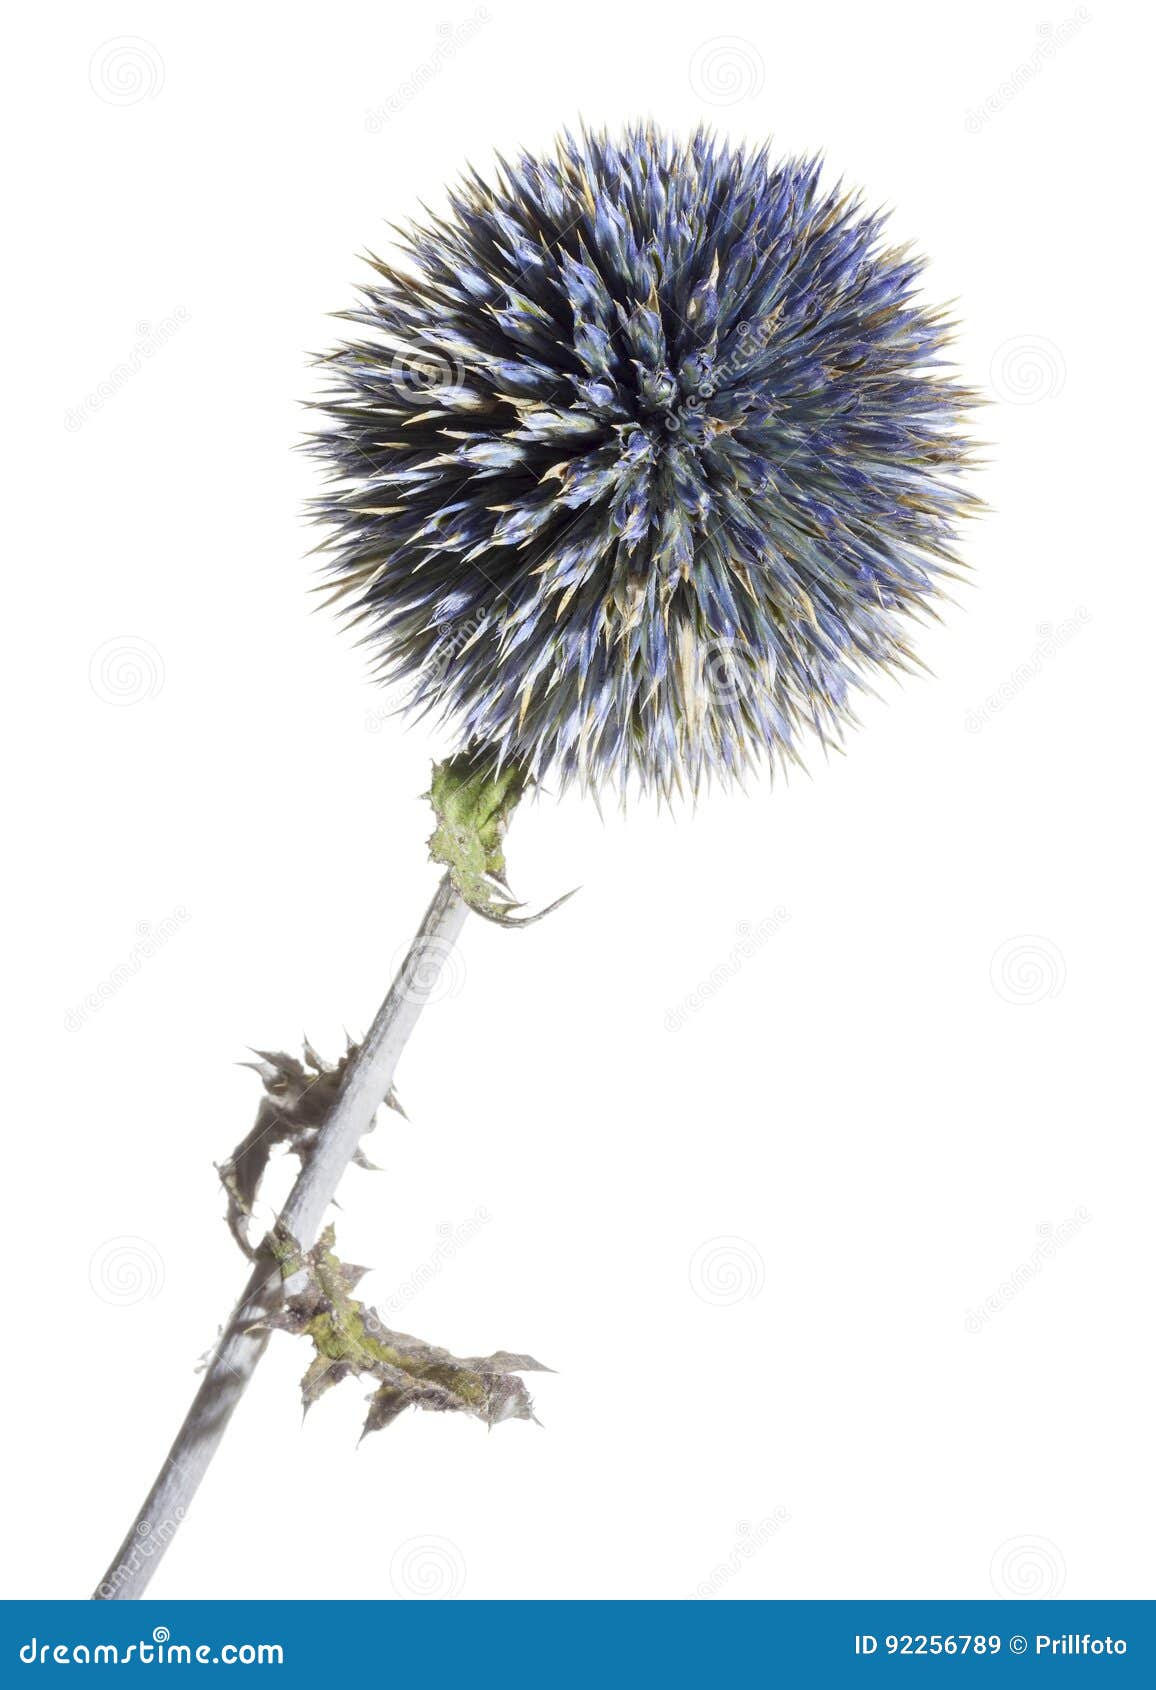 Blue thistle flower stock image. Image of bristle, floral - 92256789